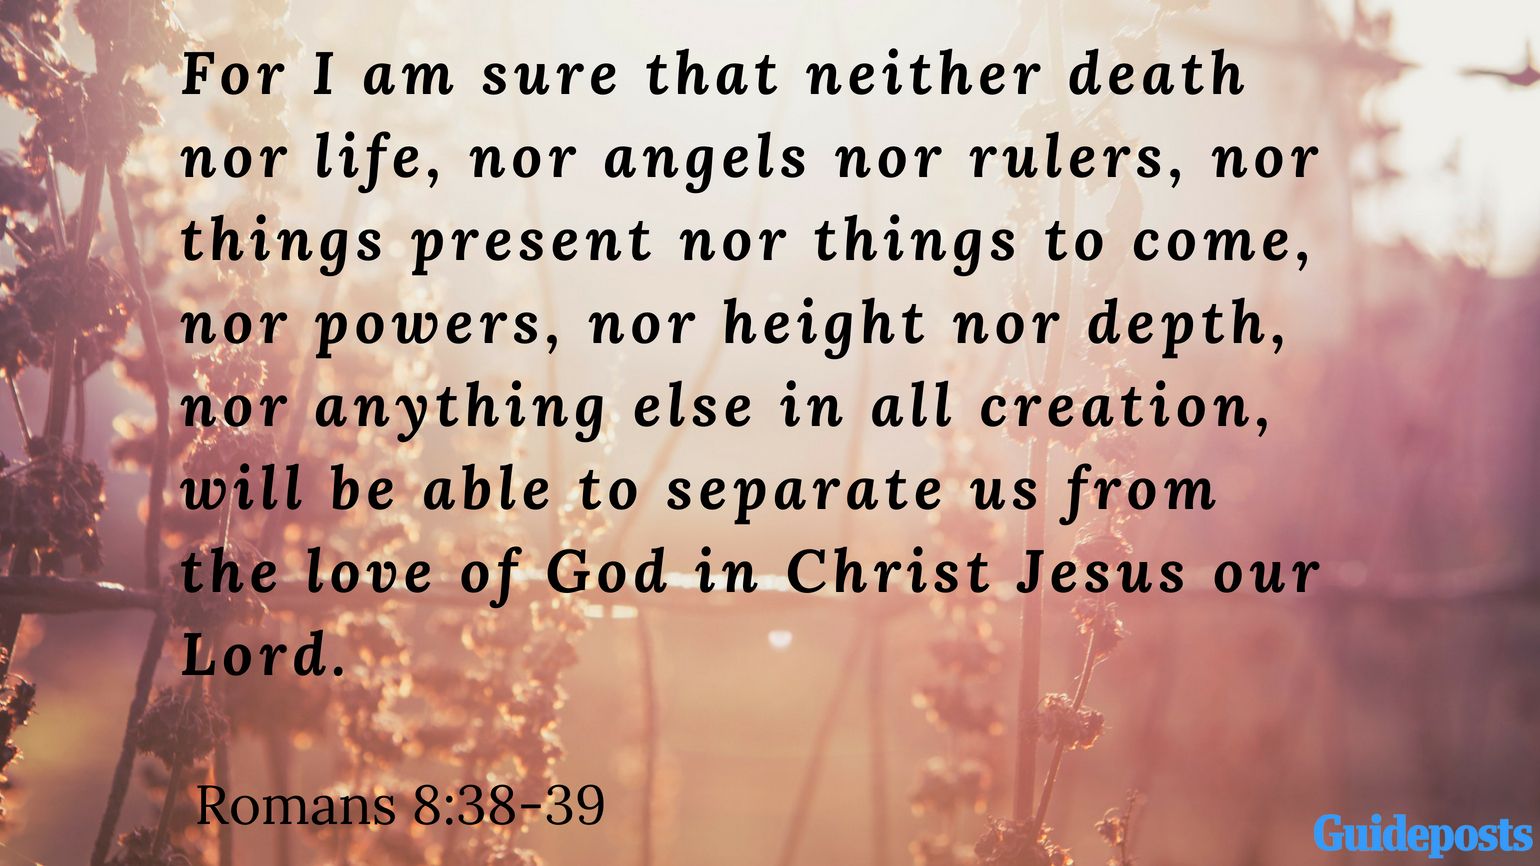 Bible Verse for Coping With Grief: For I am sure that neither death nor life, nor angels nor rulers, nor things present nor things to come, nor powers, nor height nor depth, nor anything else in all creation, will be able to separate us from the love of God in Christ Jesus our Lord. Romans 8:38-39 Better Living Life Advice